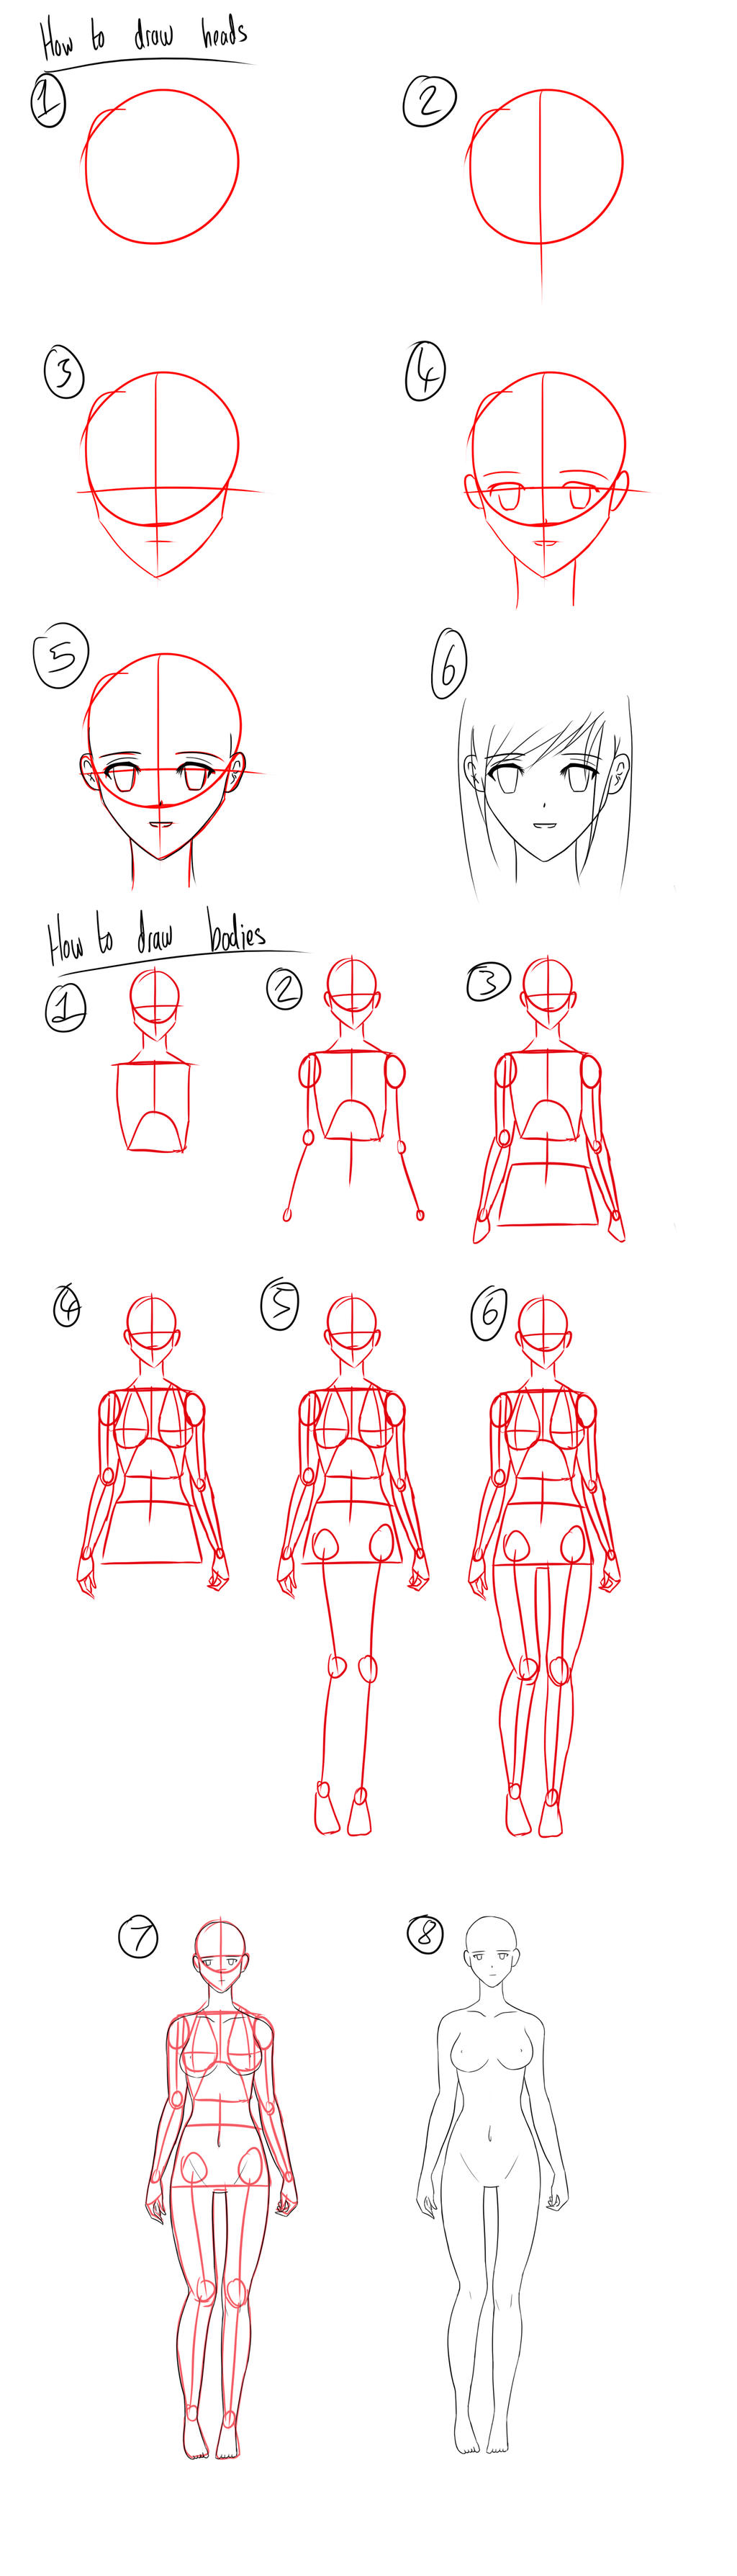 kronblad Specificitet ben Tutorial - How to Draw Anime Heads/Female Bodies by Micky-K on DeviantArt